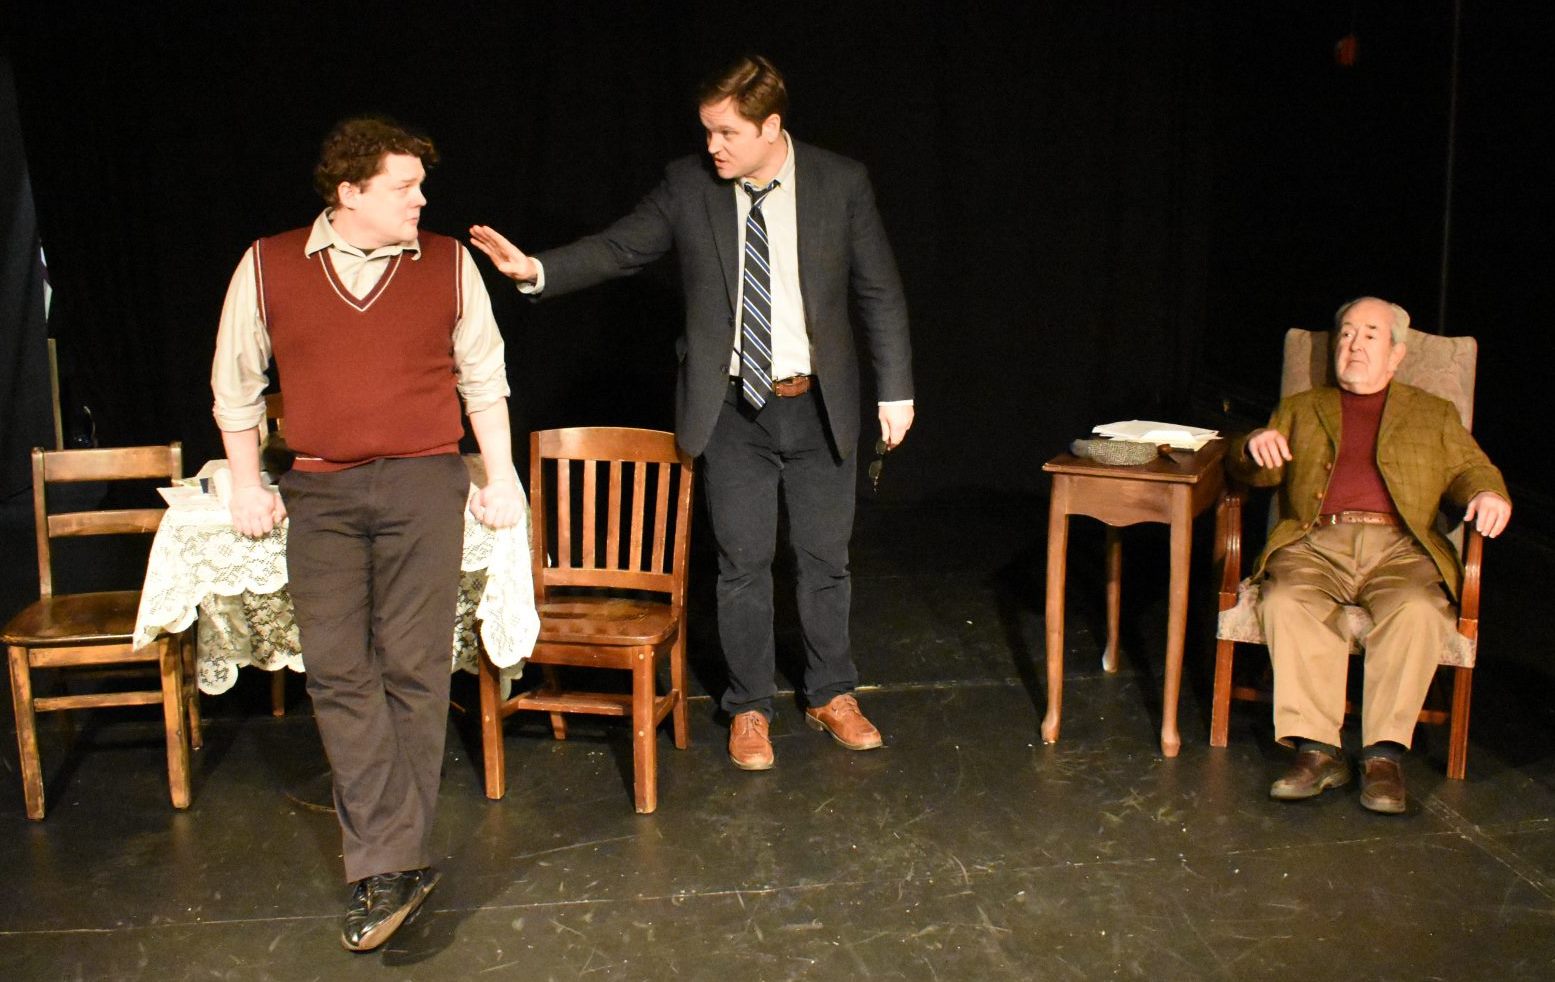 4. Oliver Donahue as Young Charlie, Dan McGlauglin as Charlie and John Cannon as DA in Irish Heritage Theatre's production of “Da.” Photo, GRACE MAIORANO, e1